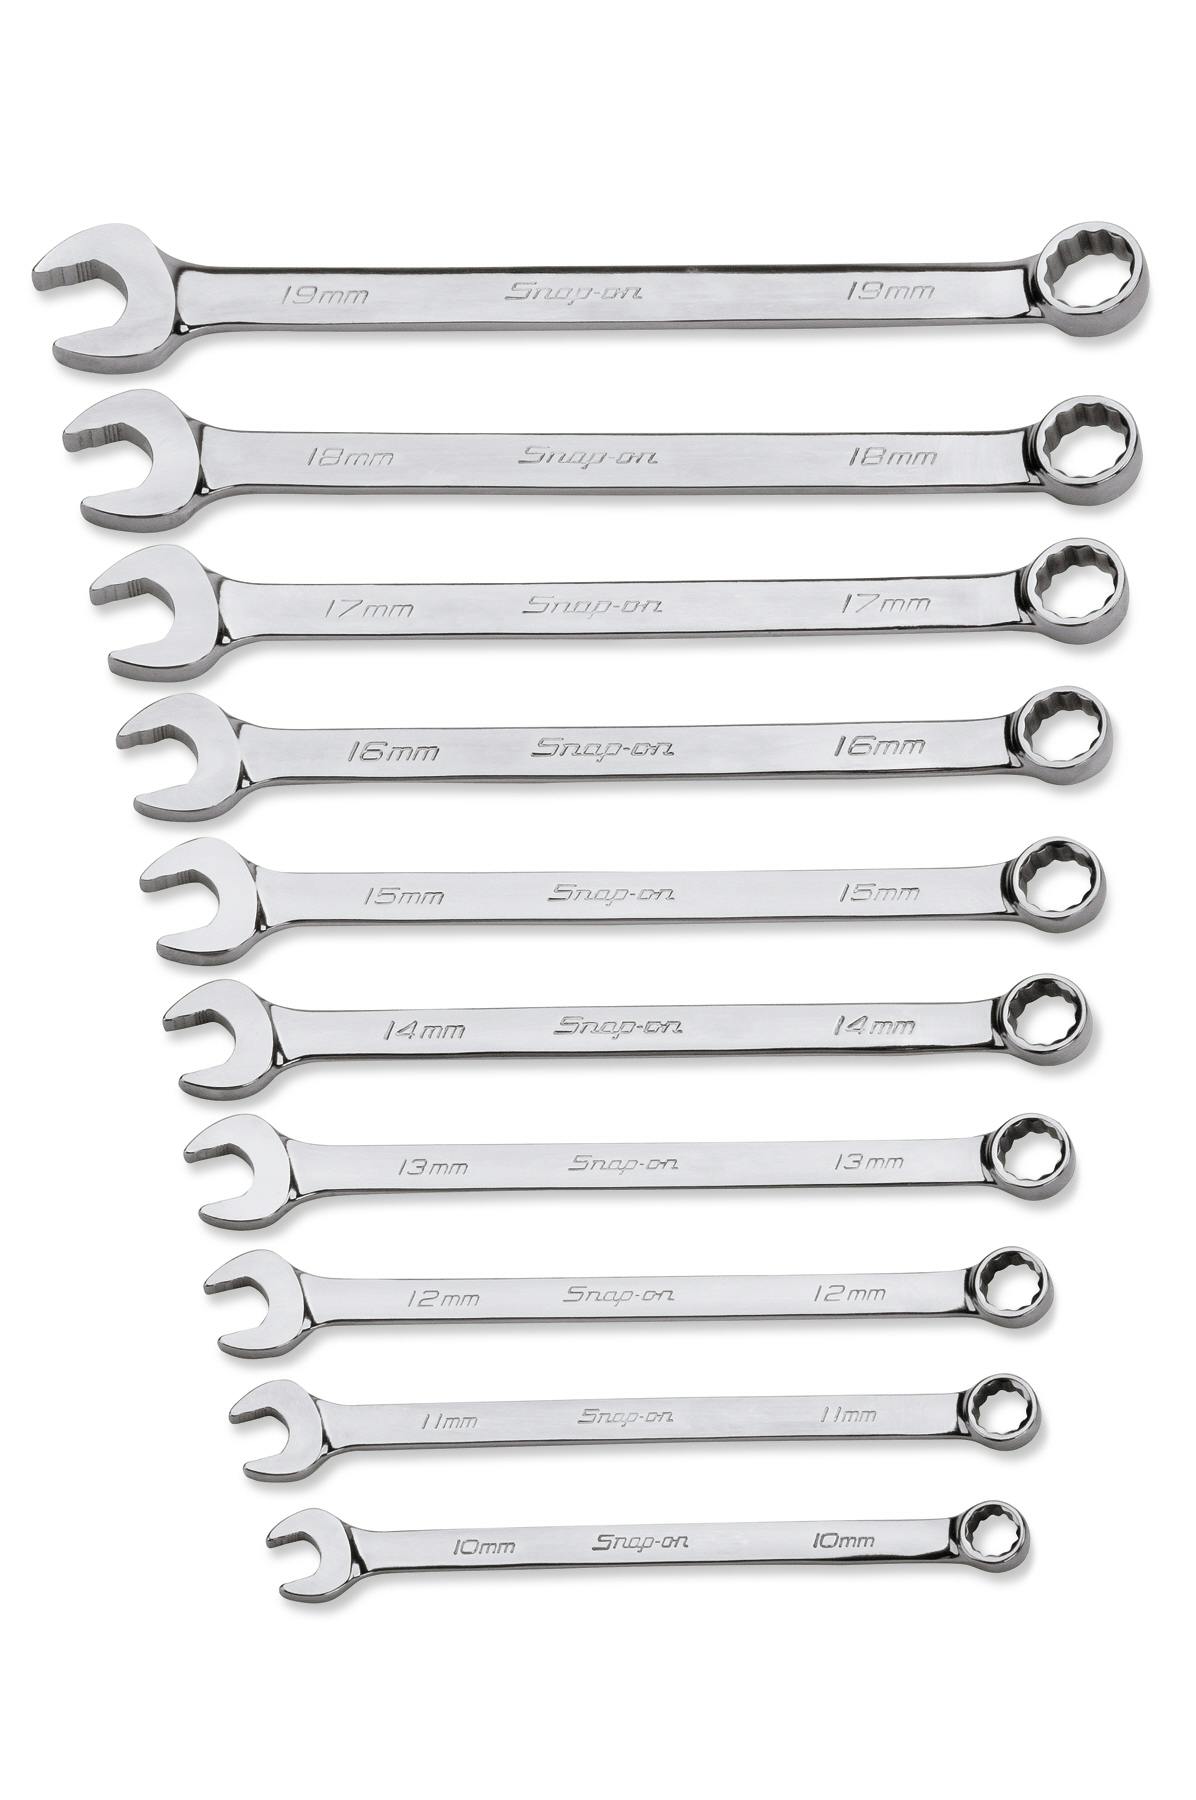 Combination wrench metric short set 10 to 19 mm 10 